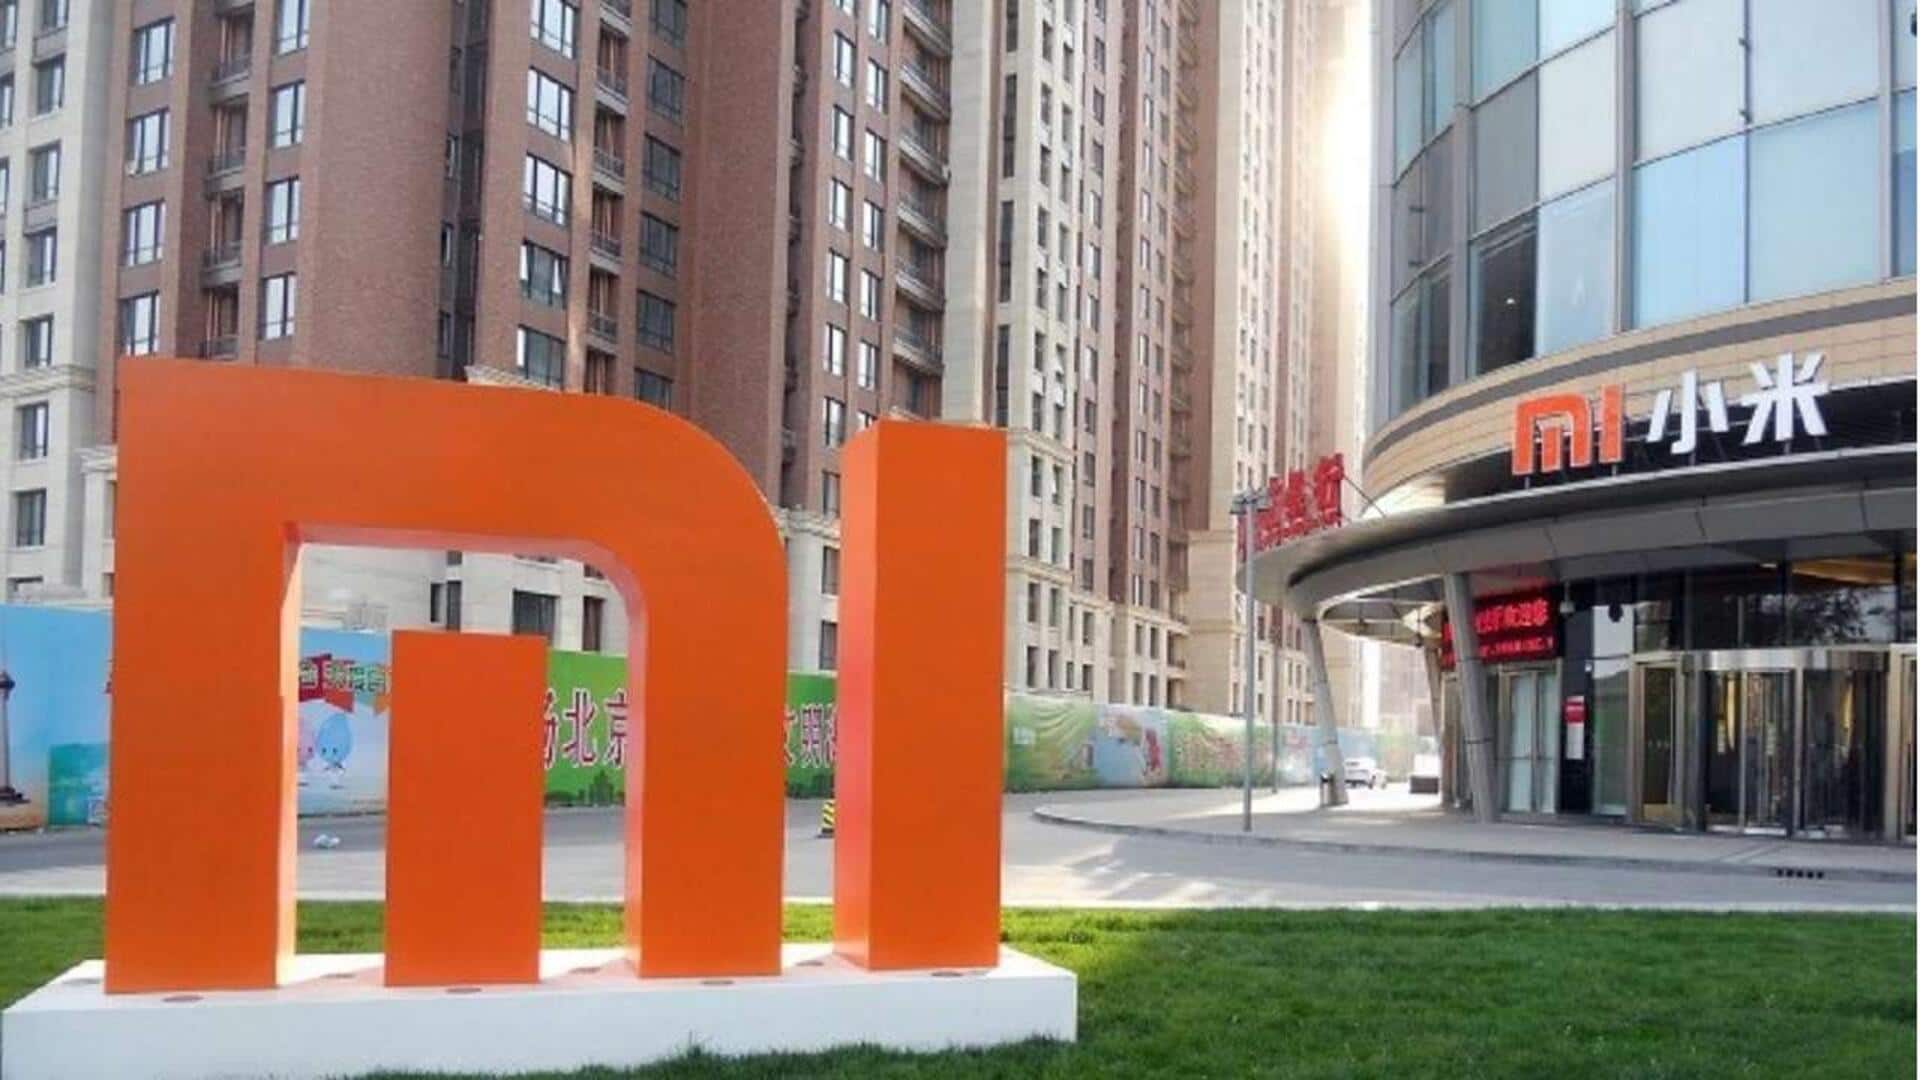 Xiaomi's Q3 net income rises 180% YoY on cost-cutting measures